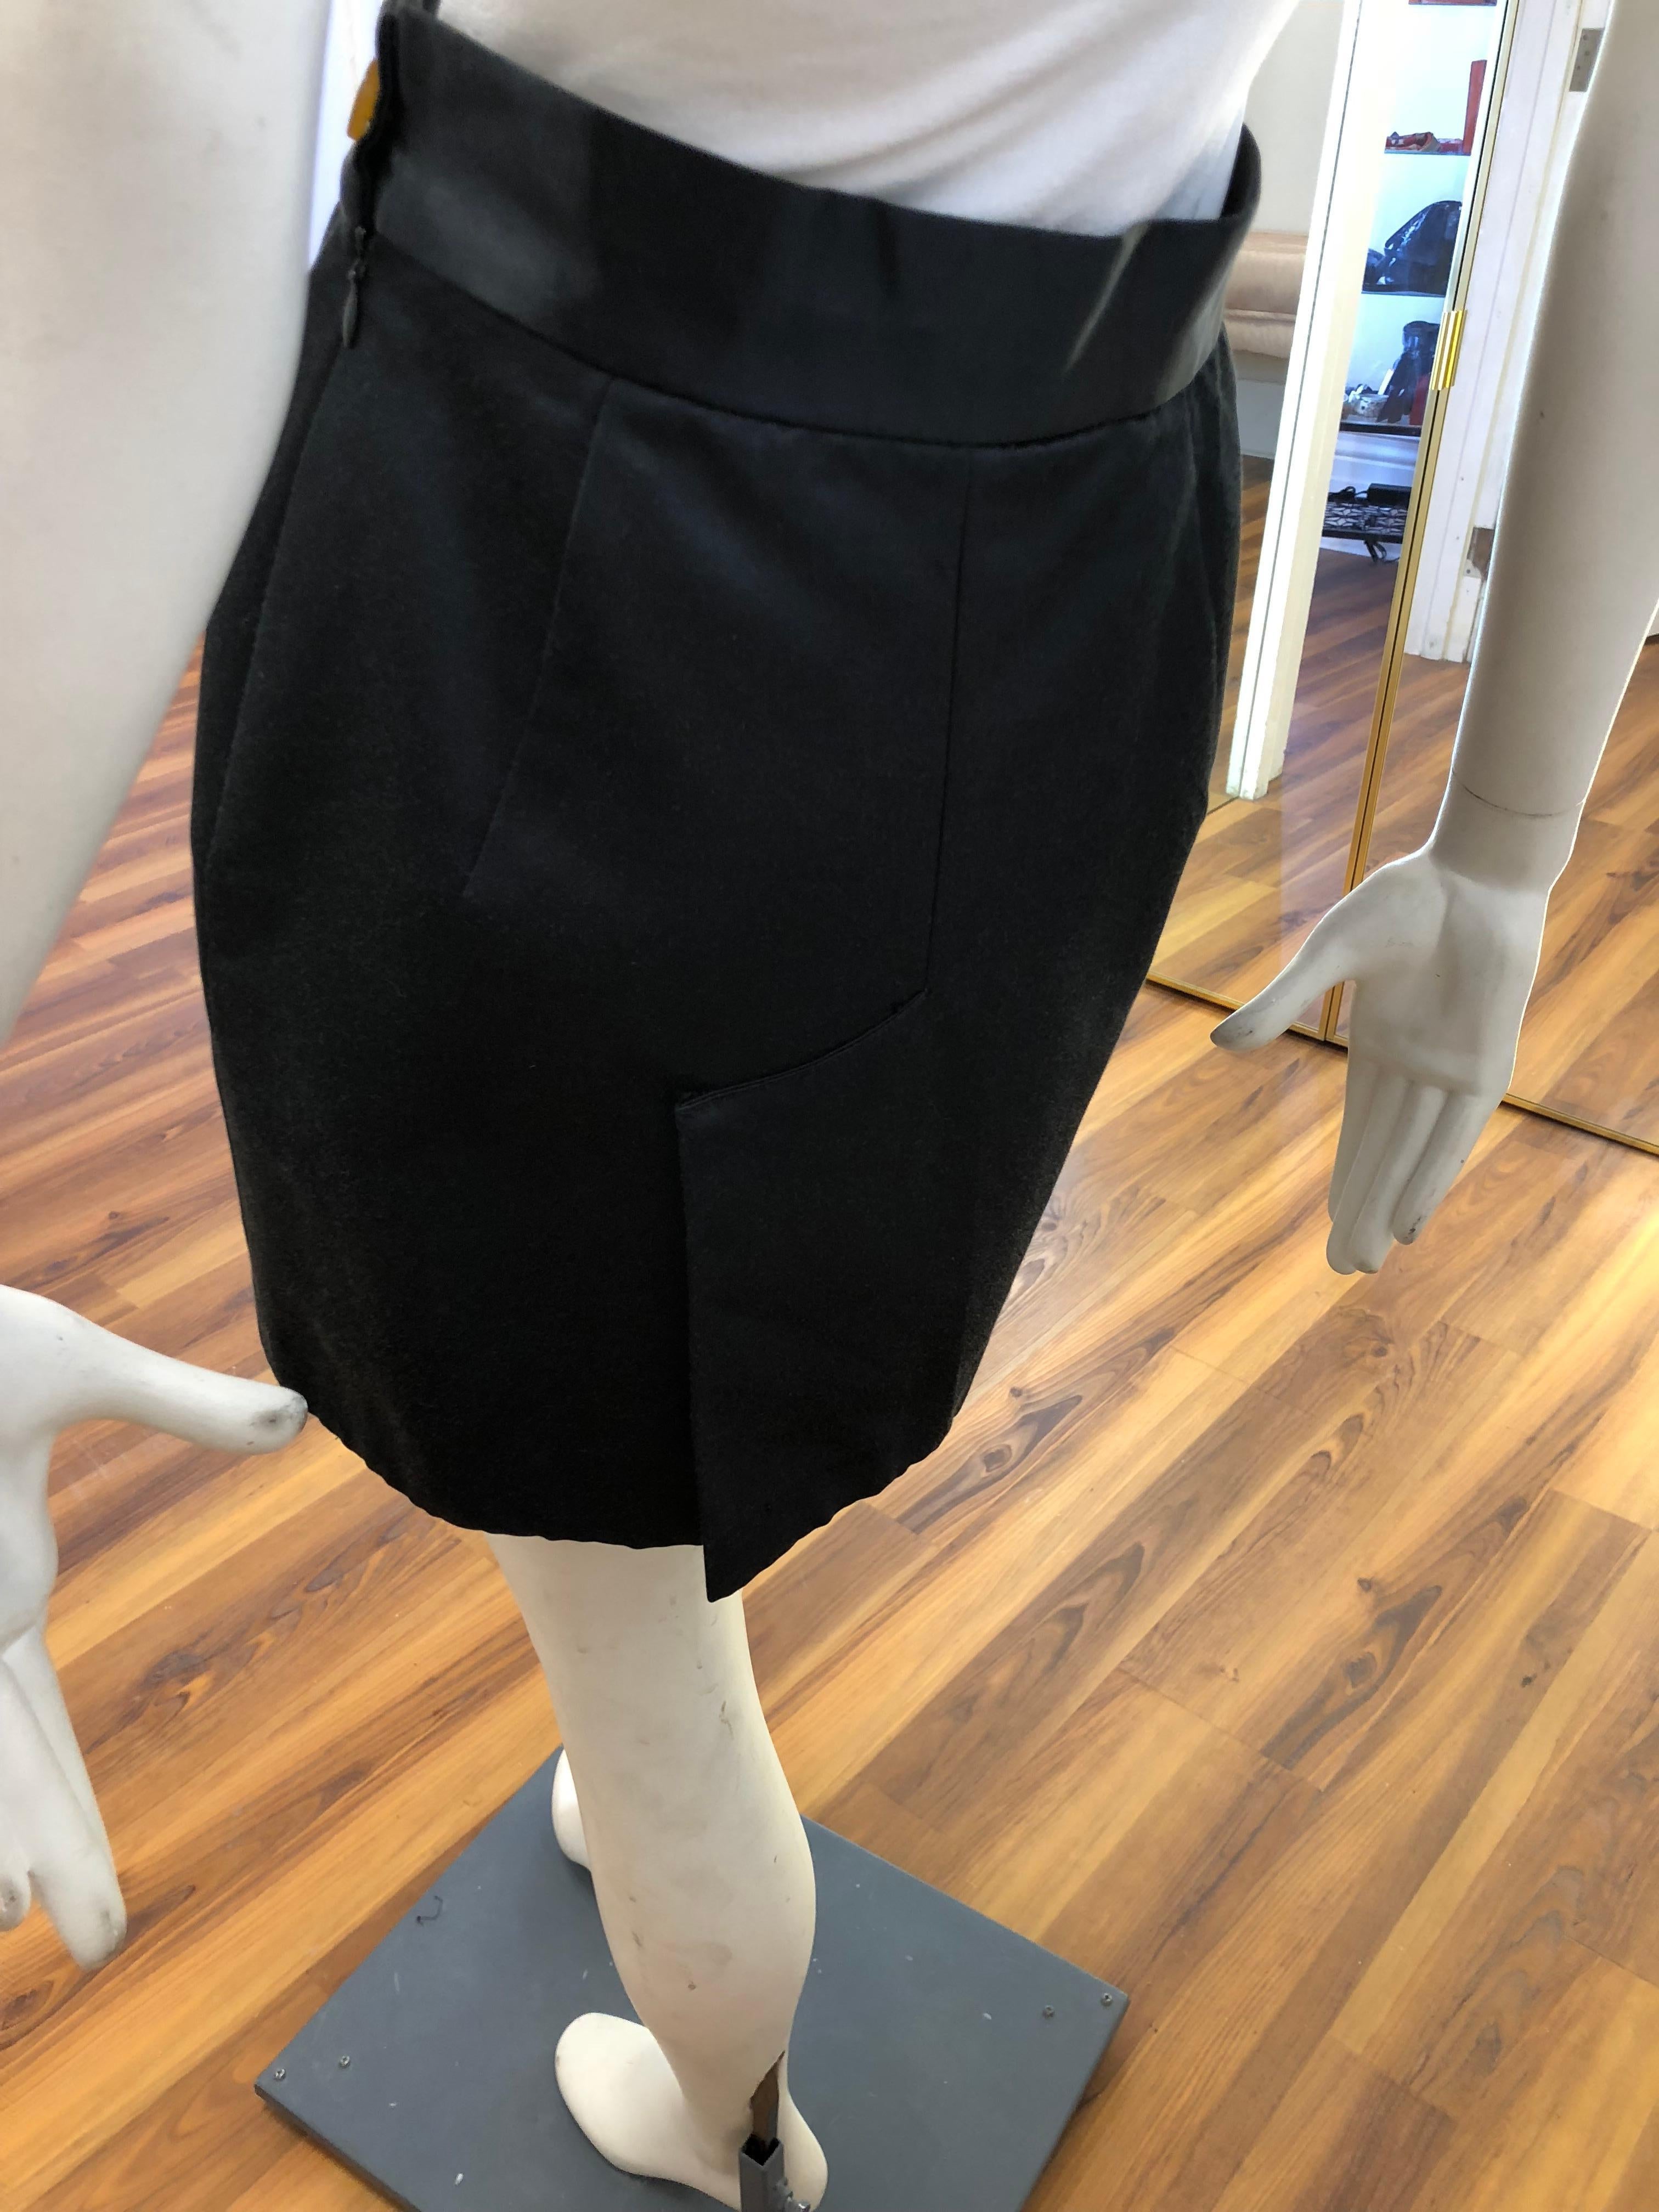 This Vivienne Westwood mini skirt is made of 65% cotton and 35% viscose and is quite plain at the front, but in the usual Westwood style has an interested back slit, and of course the iconic button. The Max Mara top comes free with the skirt.